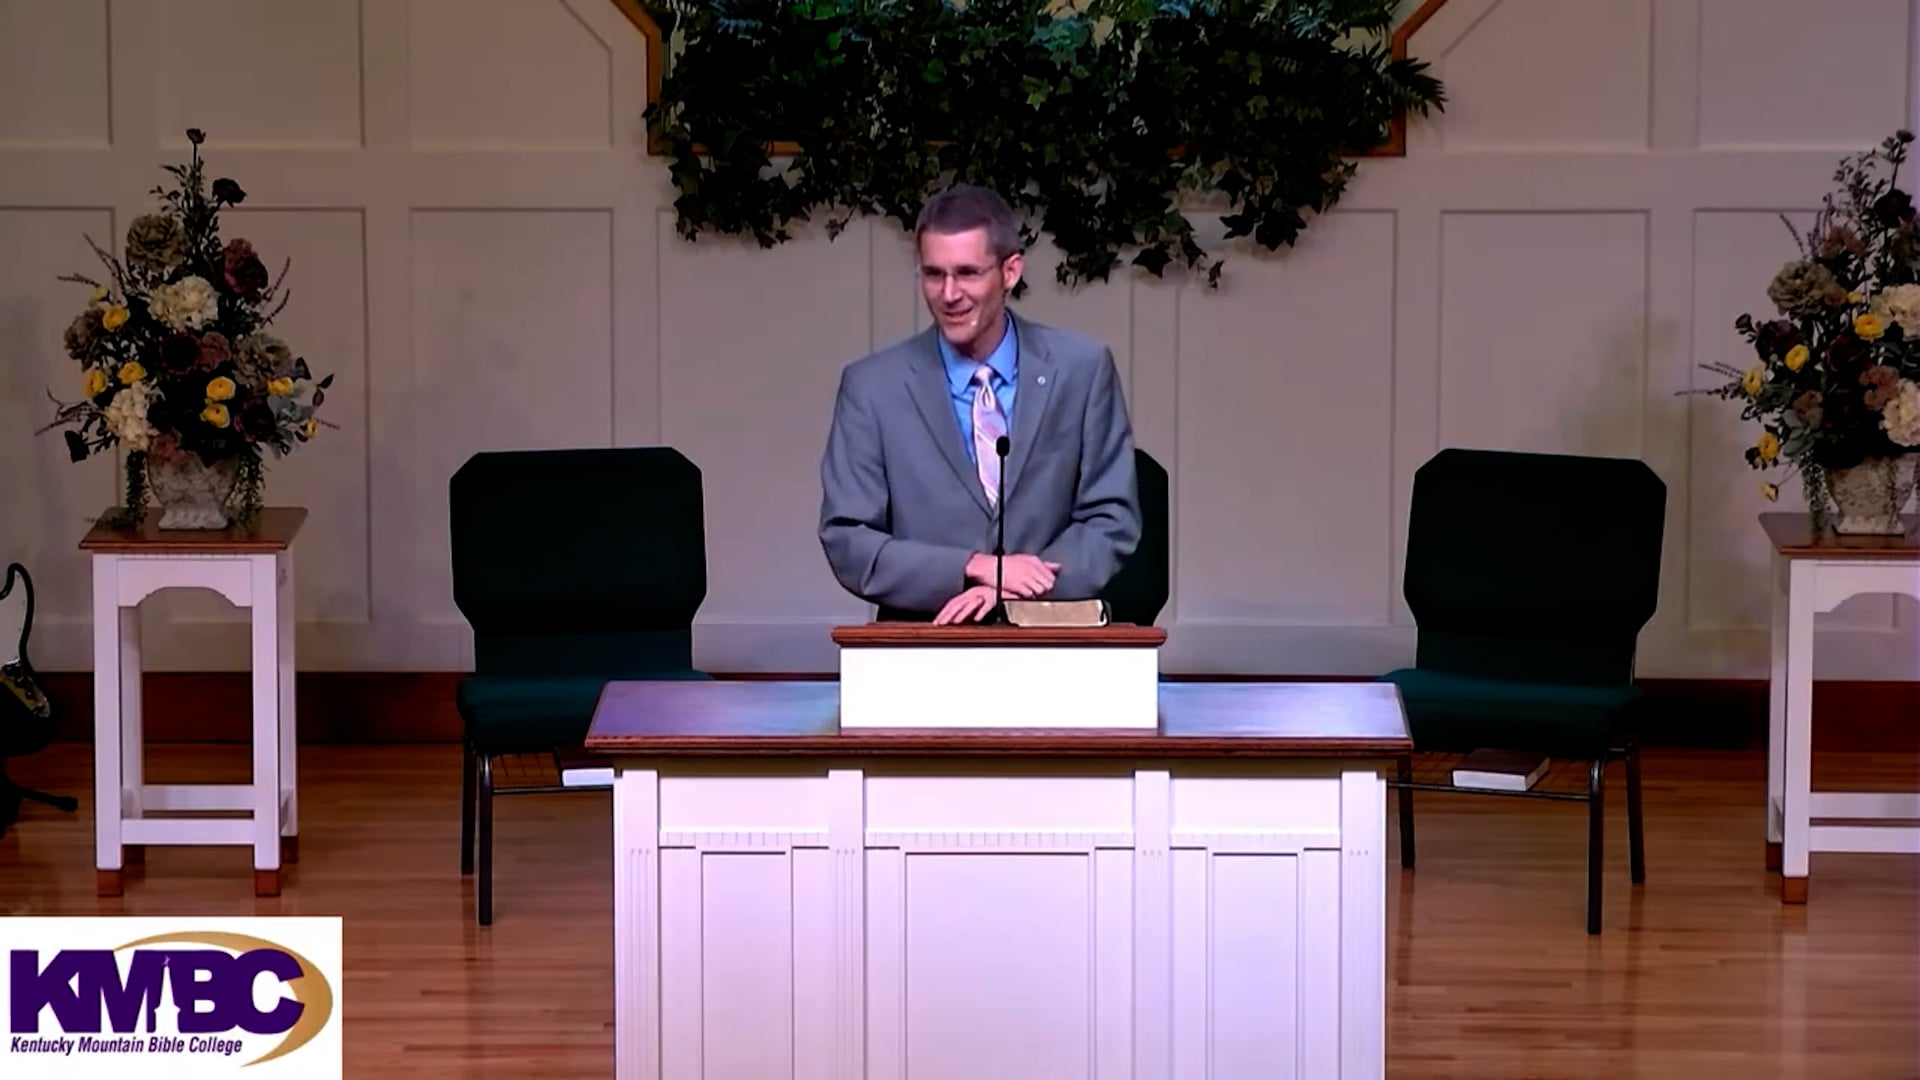 Sanctified Wholly: Body, Soul, and Spirit | Rev. Jared K. Henry at KMBC